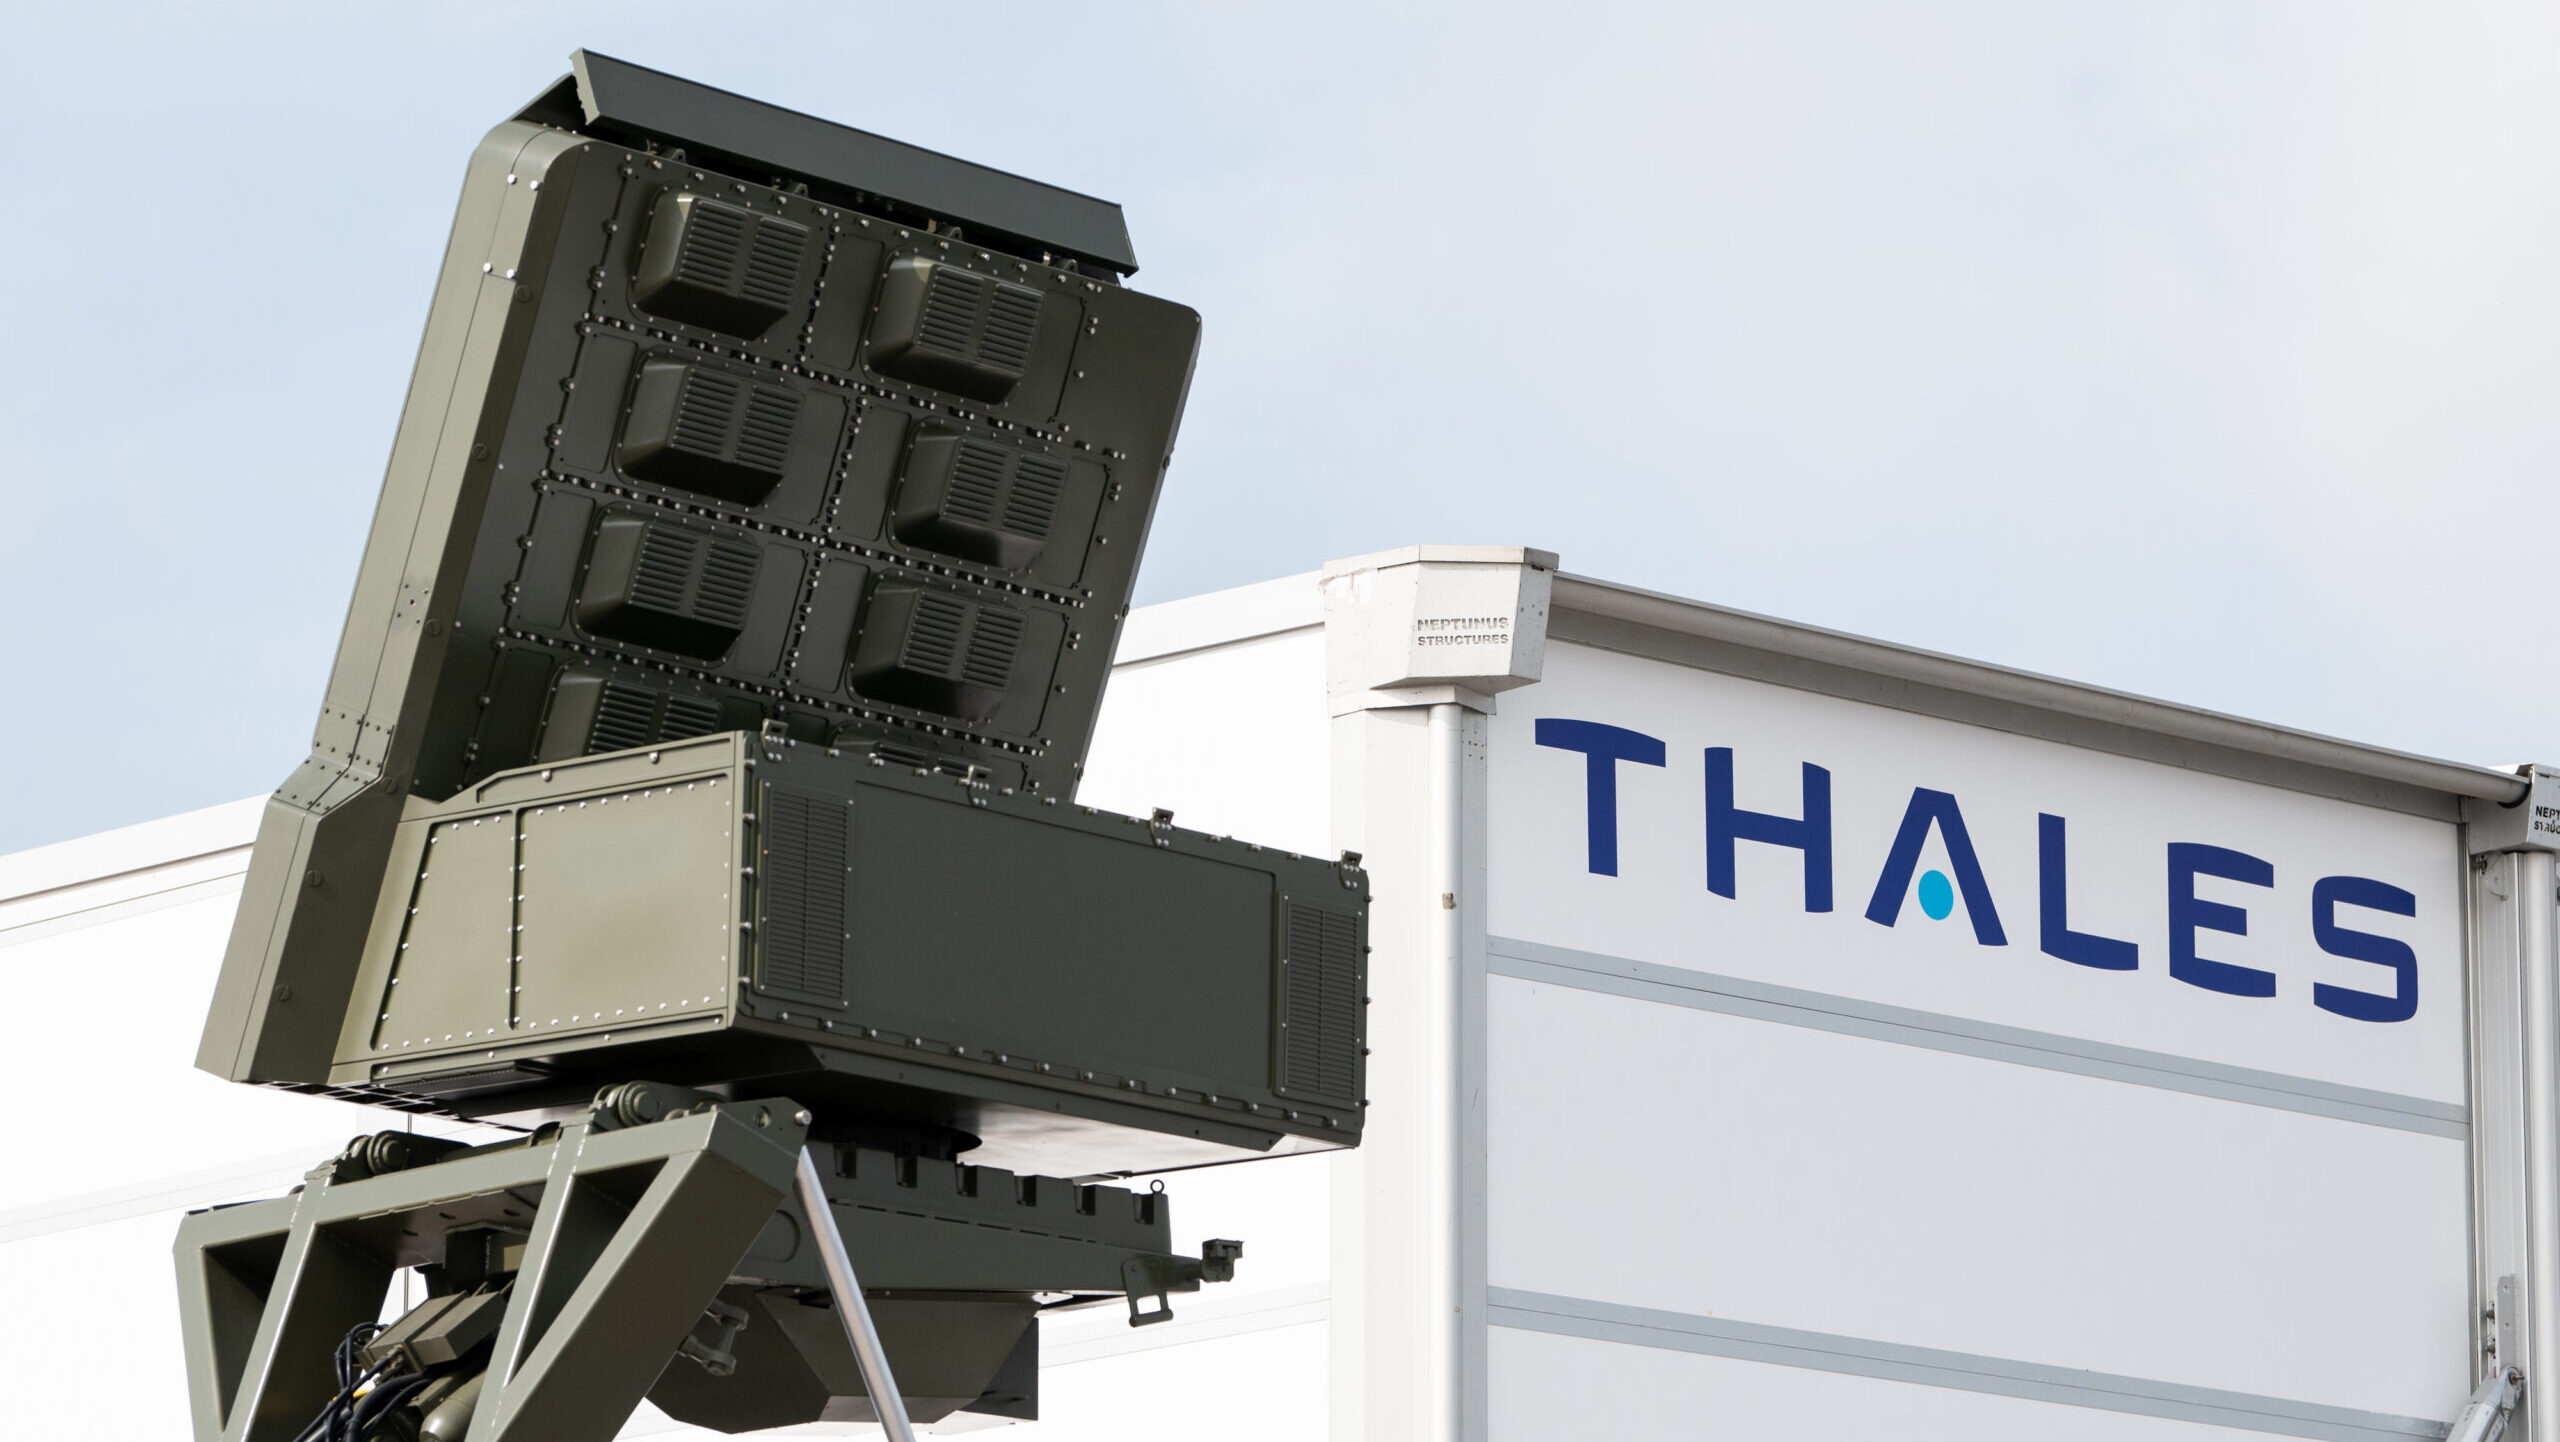 France’s Thales and Spain’s Indra announce new collaboration agreement